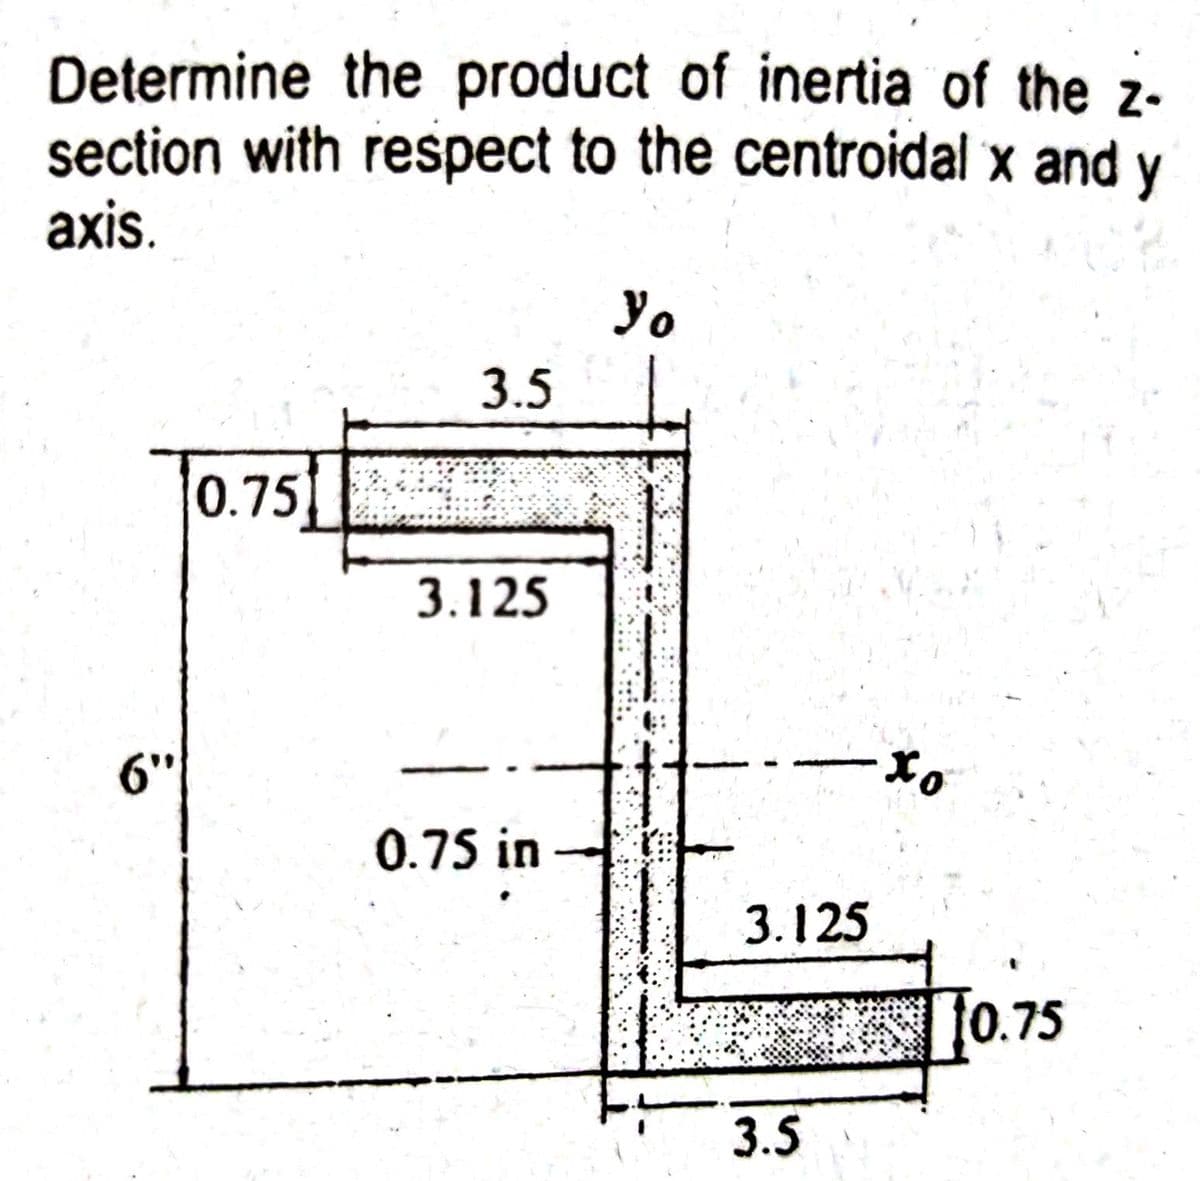 Determine the product of inertia of the z-
section with respect to the centroidal x and y
axis.
Yo
3.5
0.75
3.125
6"
0.
0.75 in
3.125
[0.75
3.5
